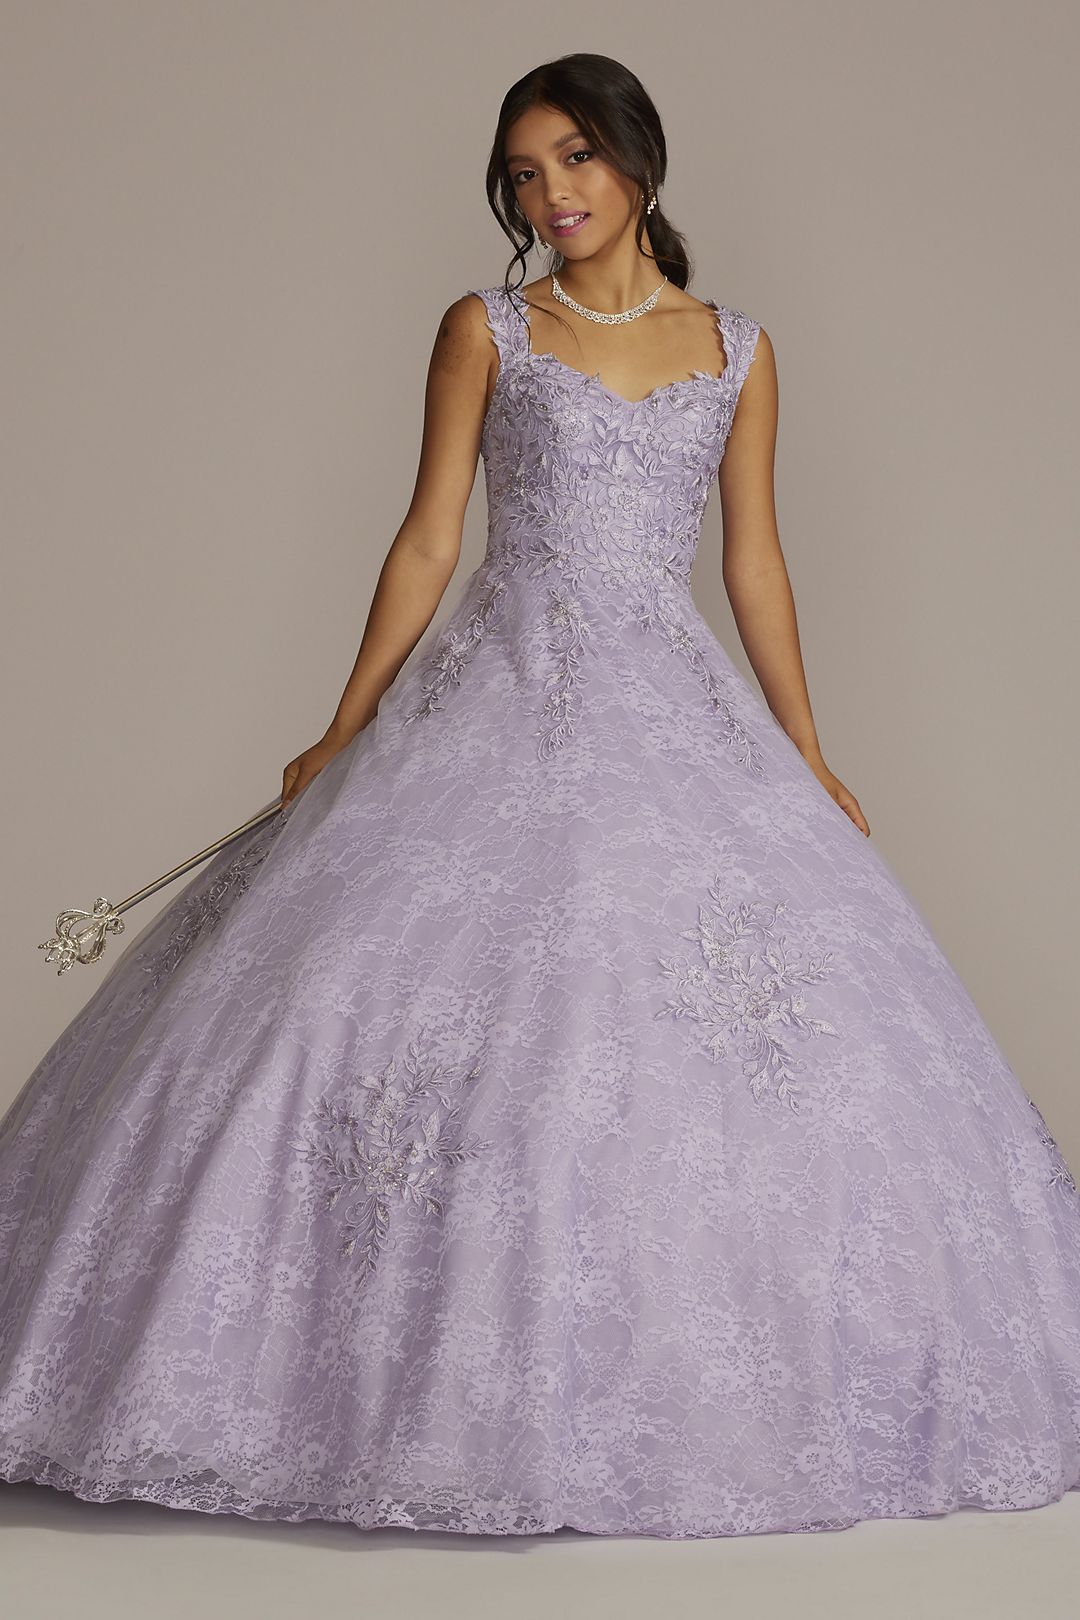 Lace Applique Semi-Cap Sleeve Quince Ball Gown Image 1